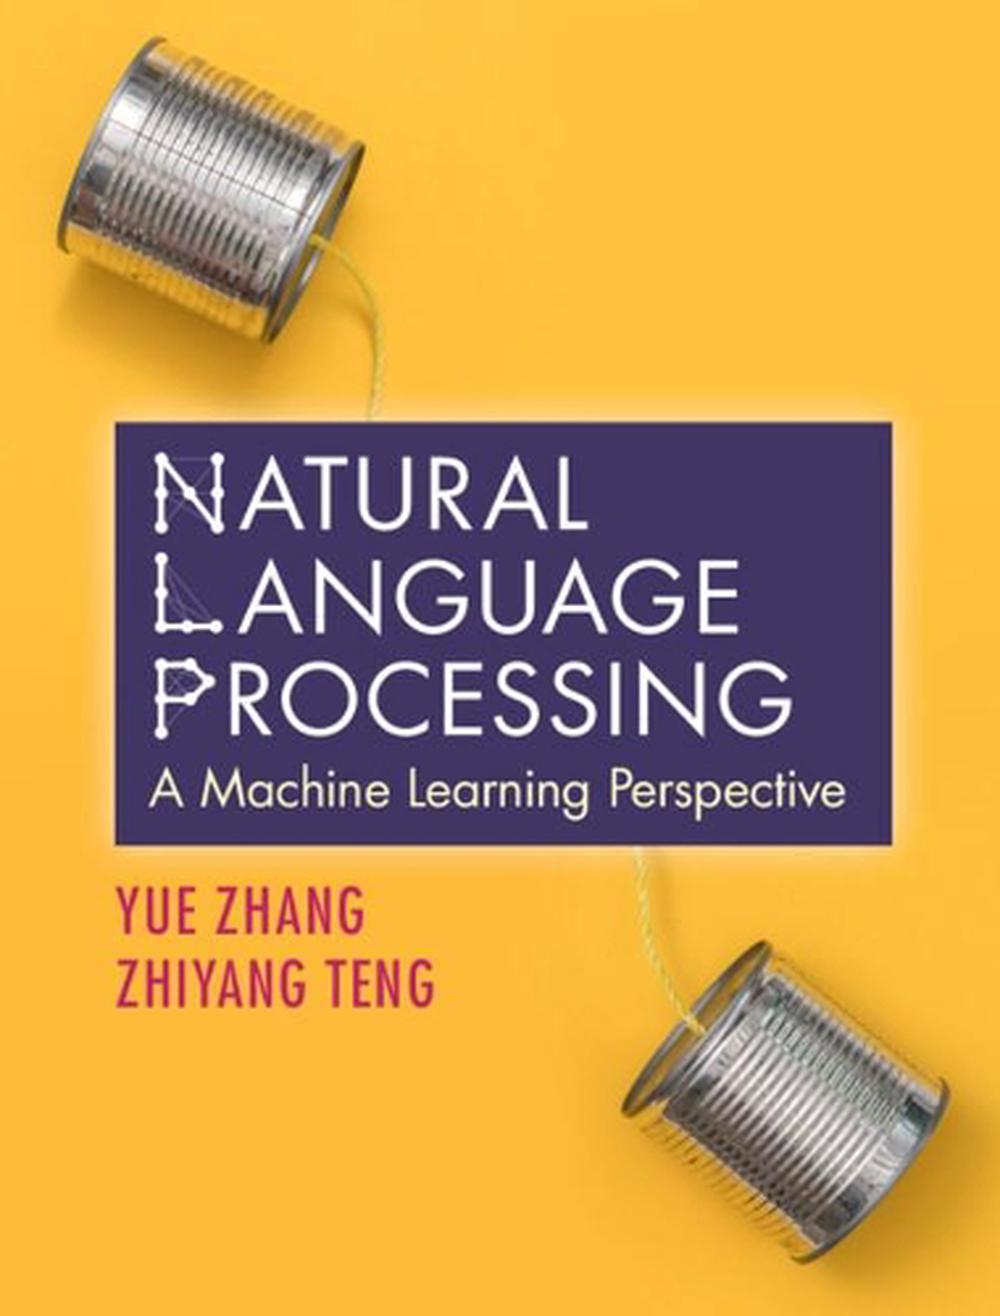 Buy　The　by　Natural　Hardcover,　Yue　Processing　at　Language　online　9781108420211　Zhang,　Nile